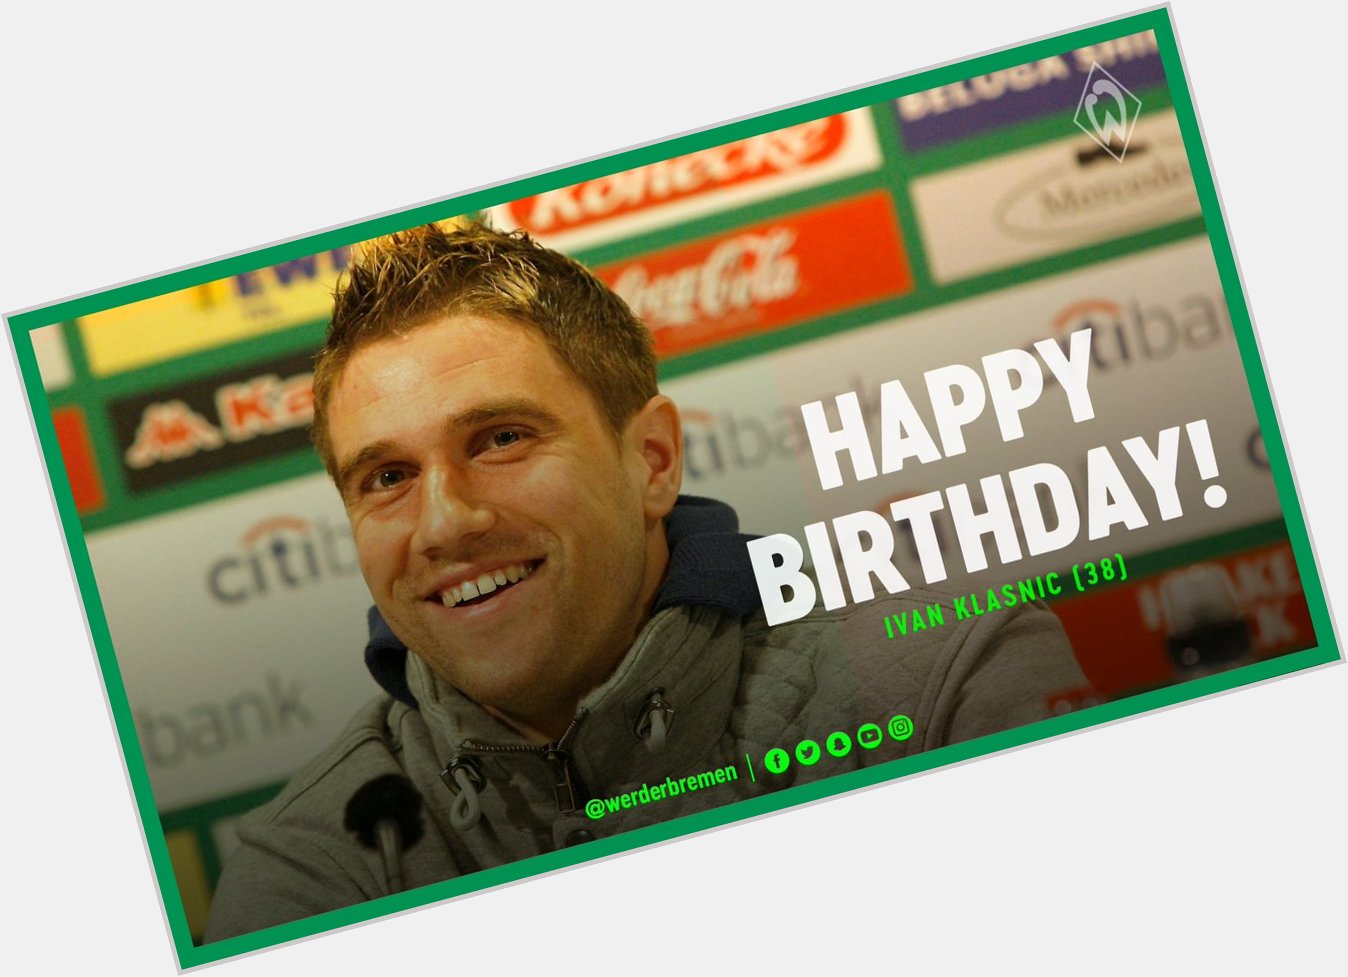 We wish former Green-White Ivan a happy birthday and above all good health  